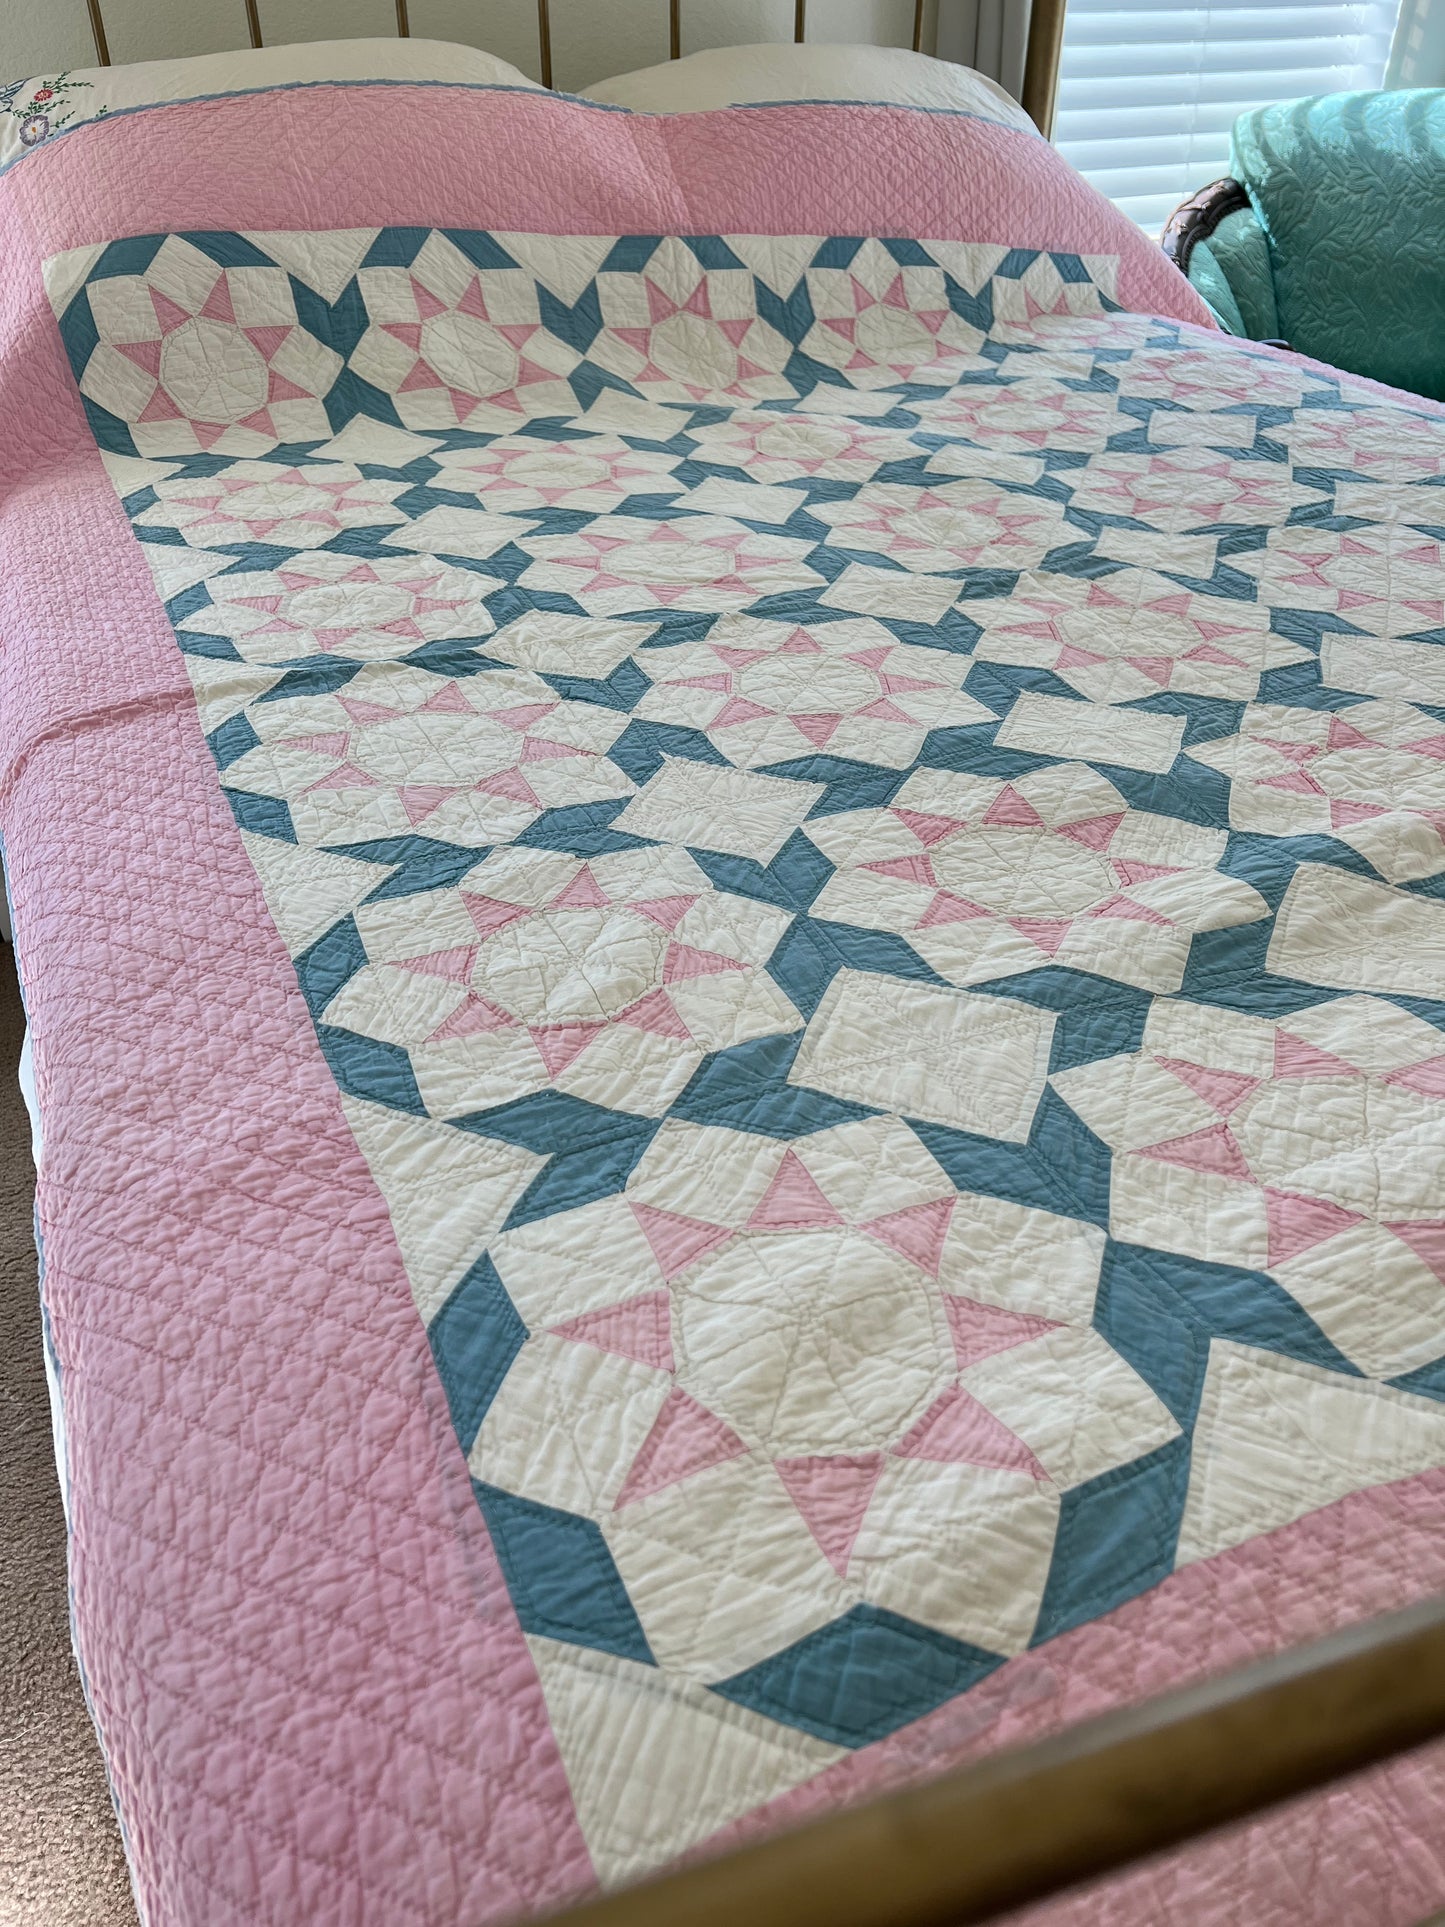 1952 Star flower pink and blue quilt